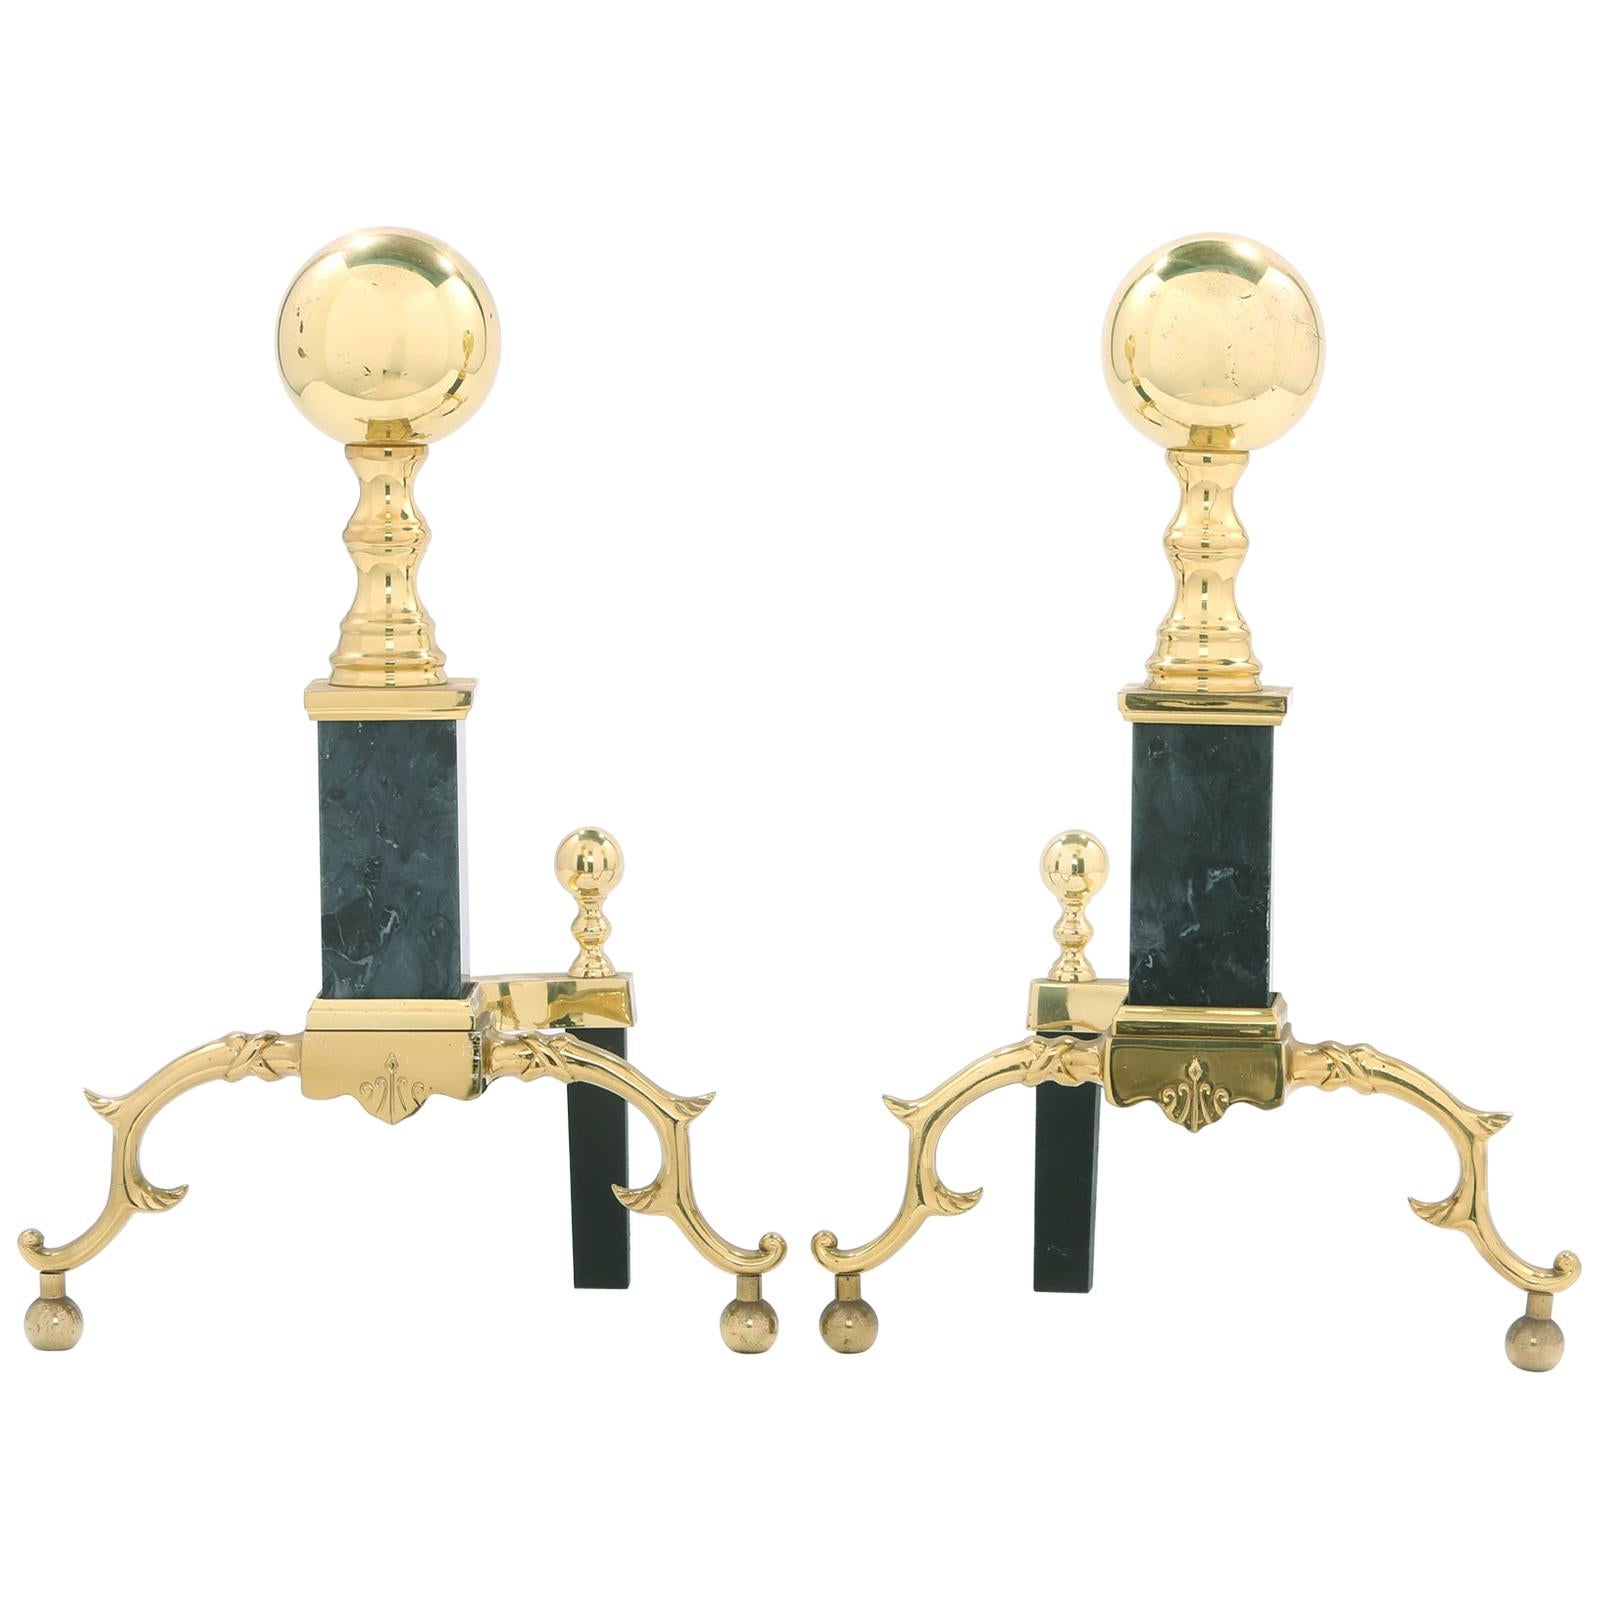 Solid Brass / Marble Pair Regency Style Andirons